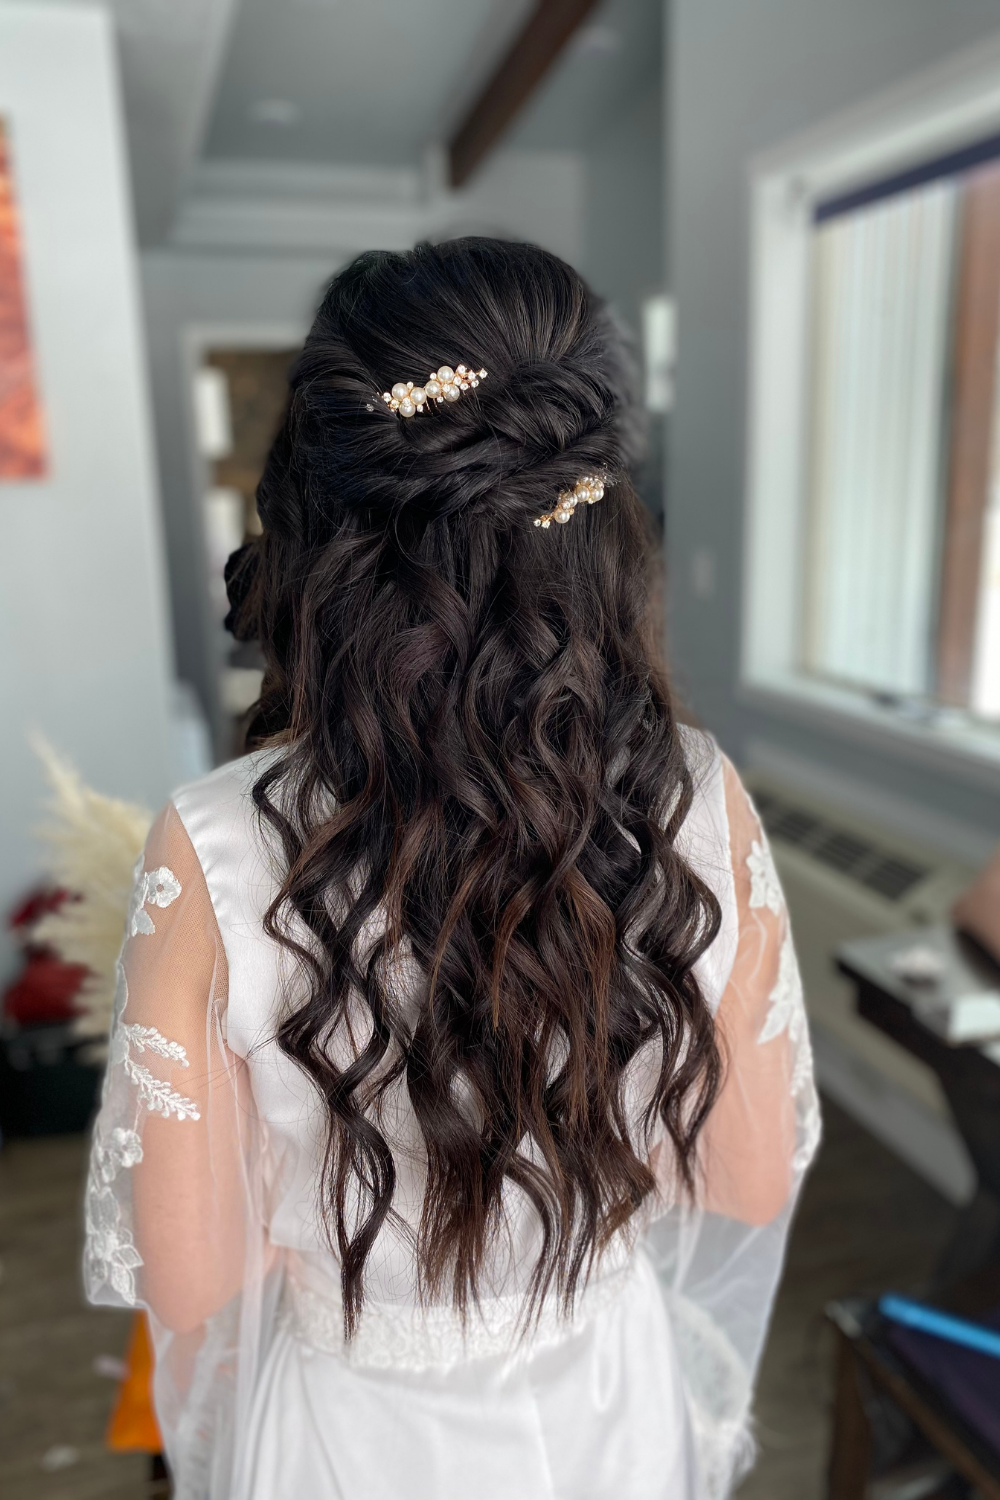 tips for choosing your wedding day hairstyle twistmpretty.com